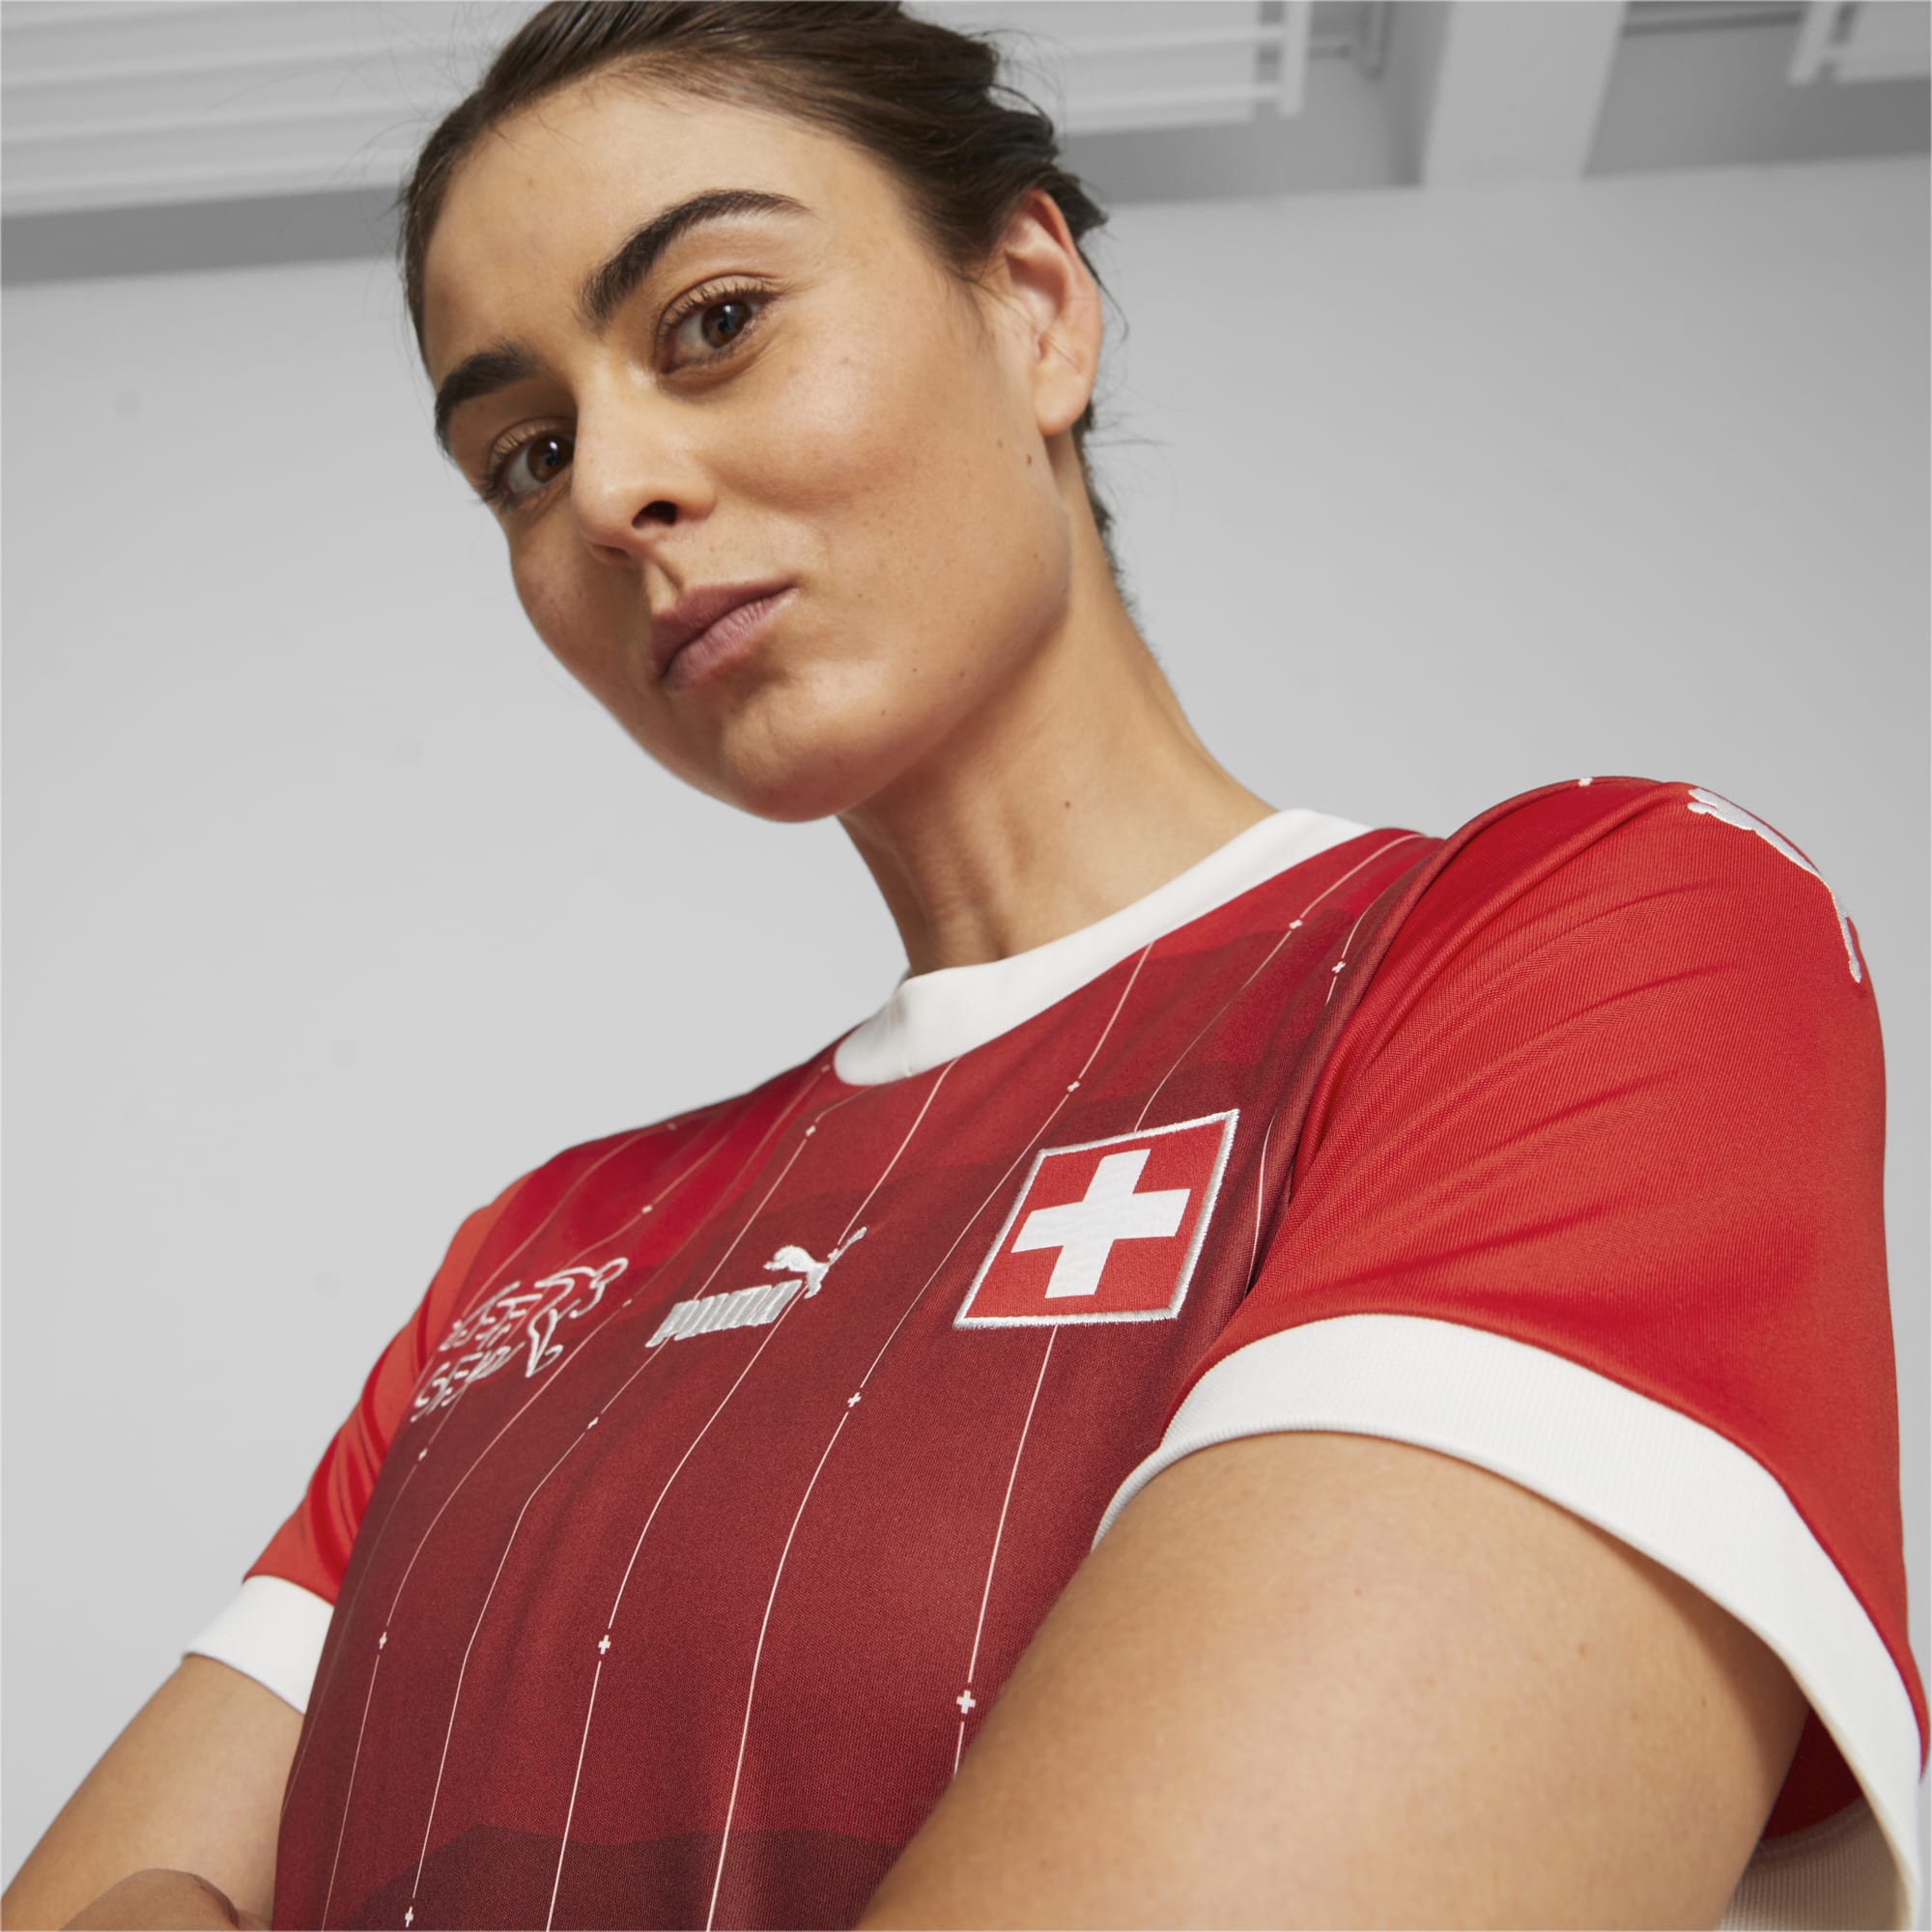 PUMA Switzerland 23/24 Women's World Cup Home Jersey, Red/White, Size XS, Clothing